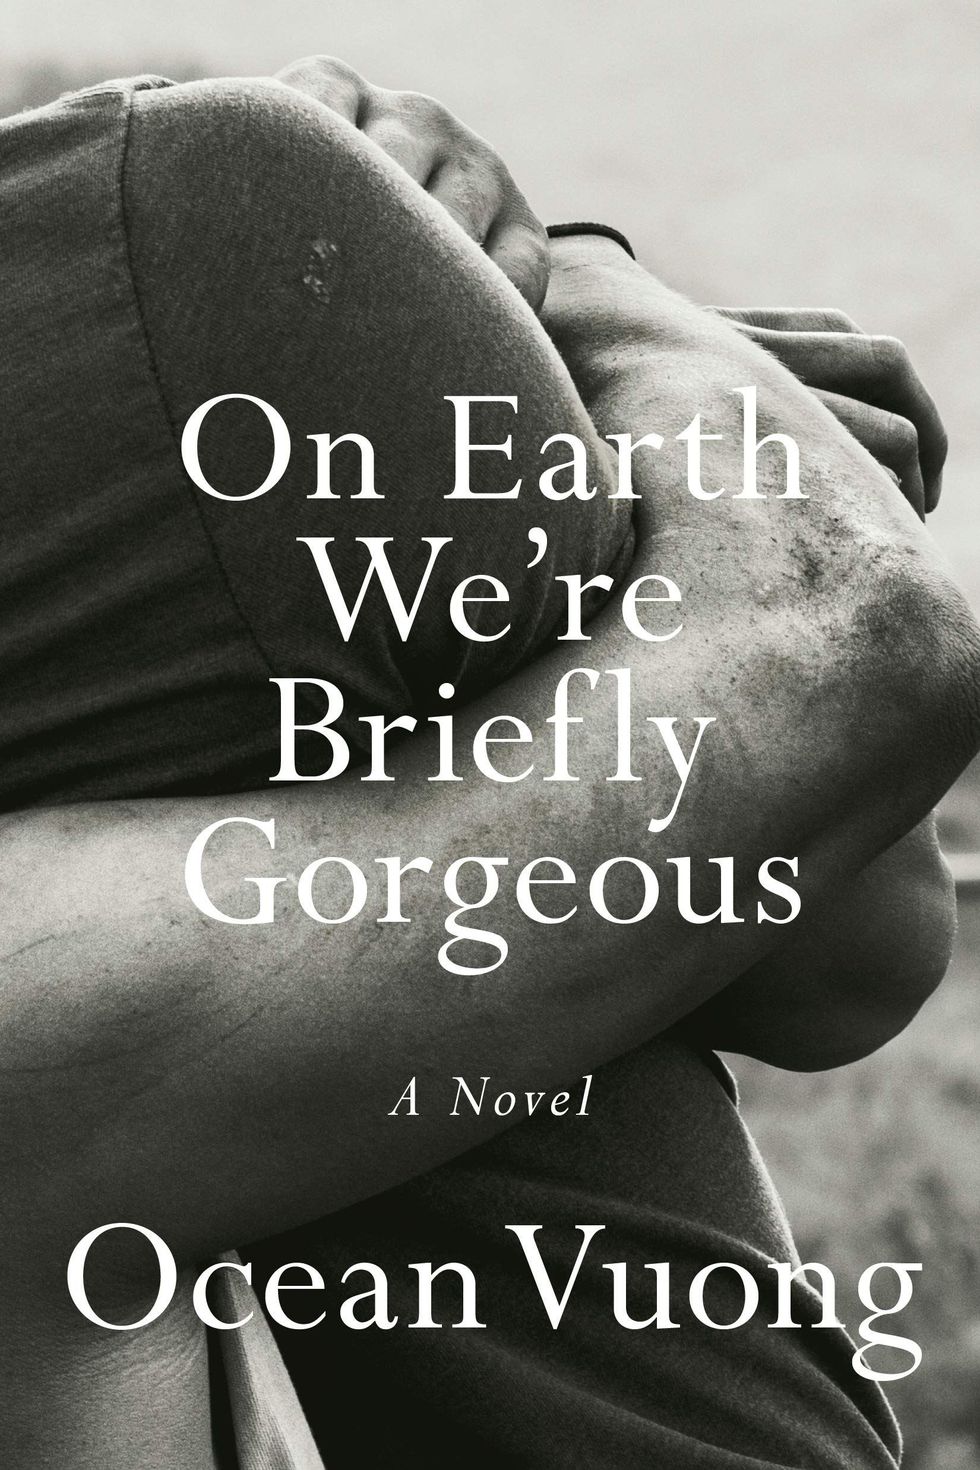 ‘On Earth We’re Briefly Gorgeous: A Novel’ by Ocean Vuong